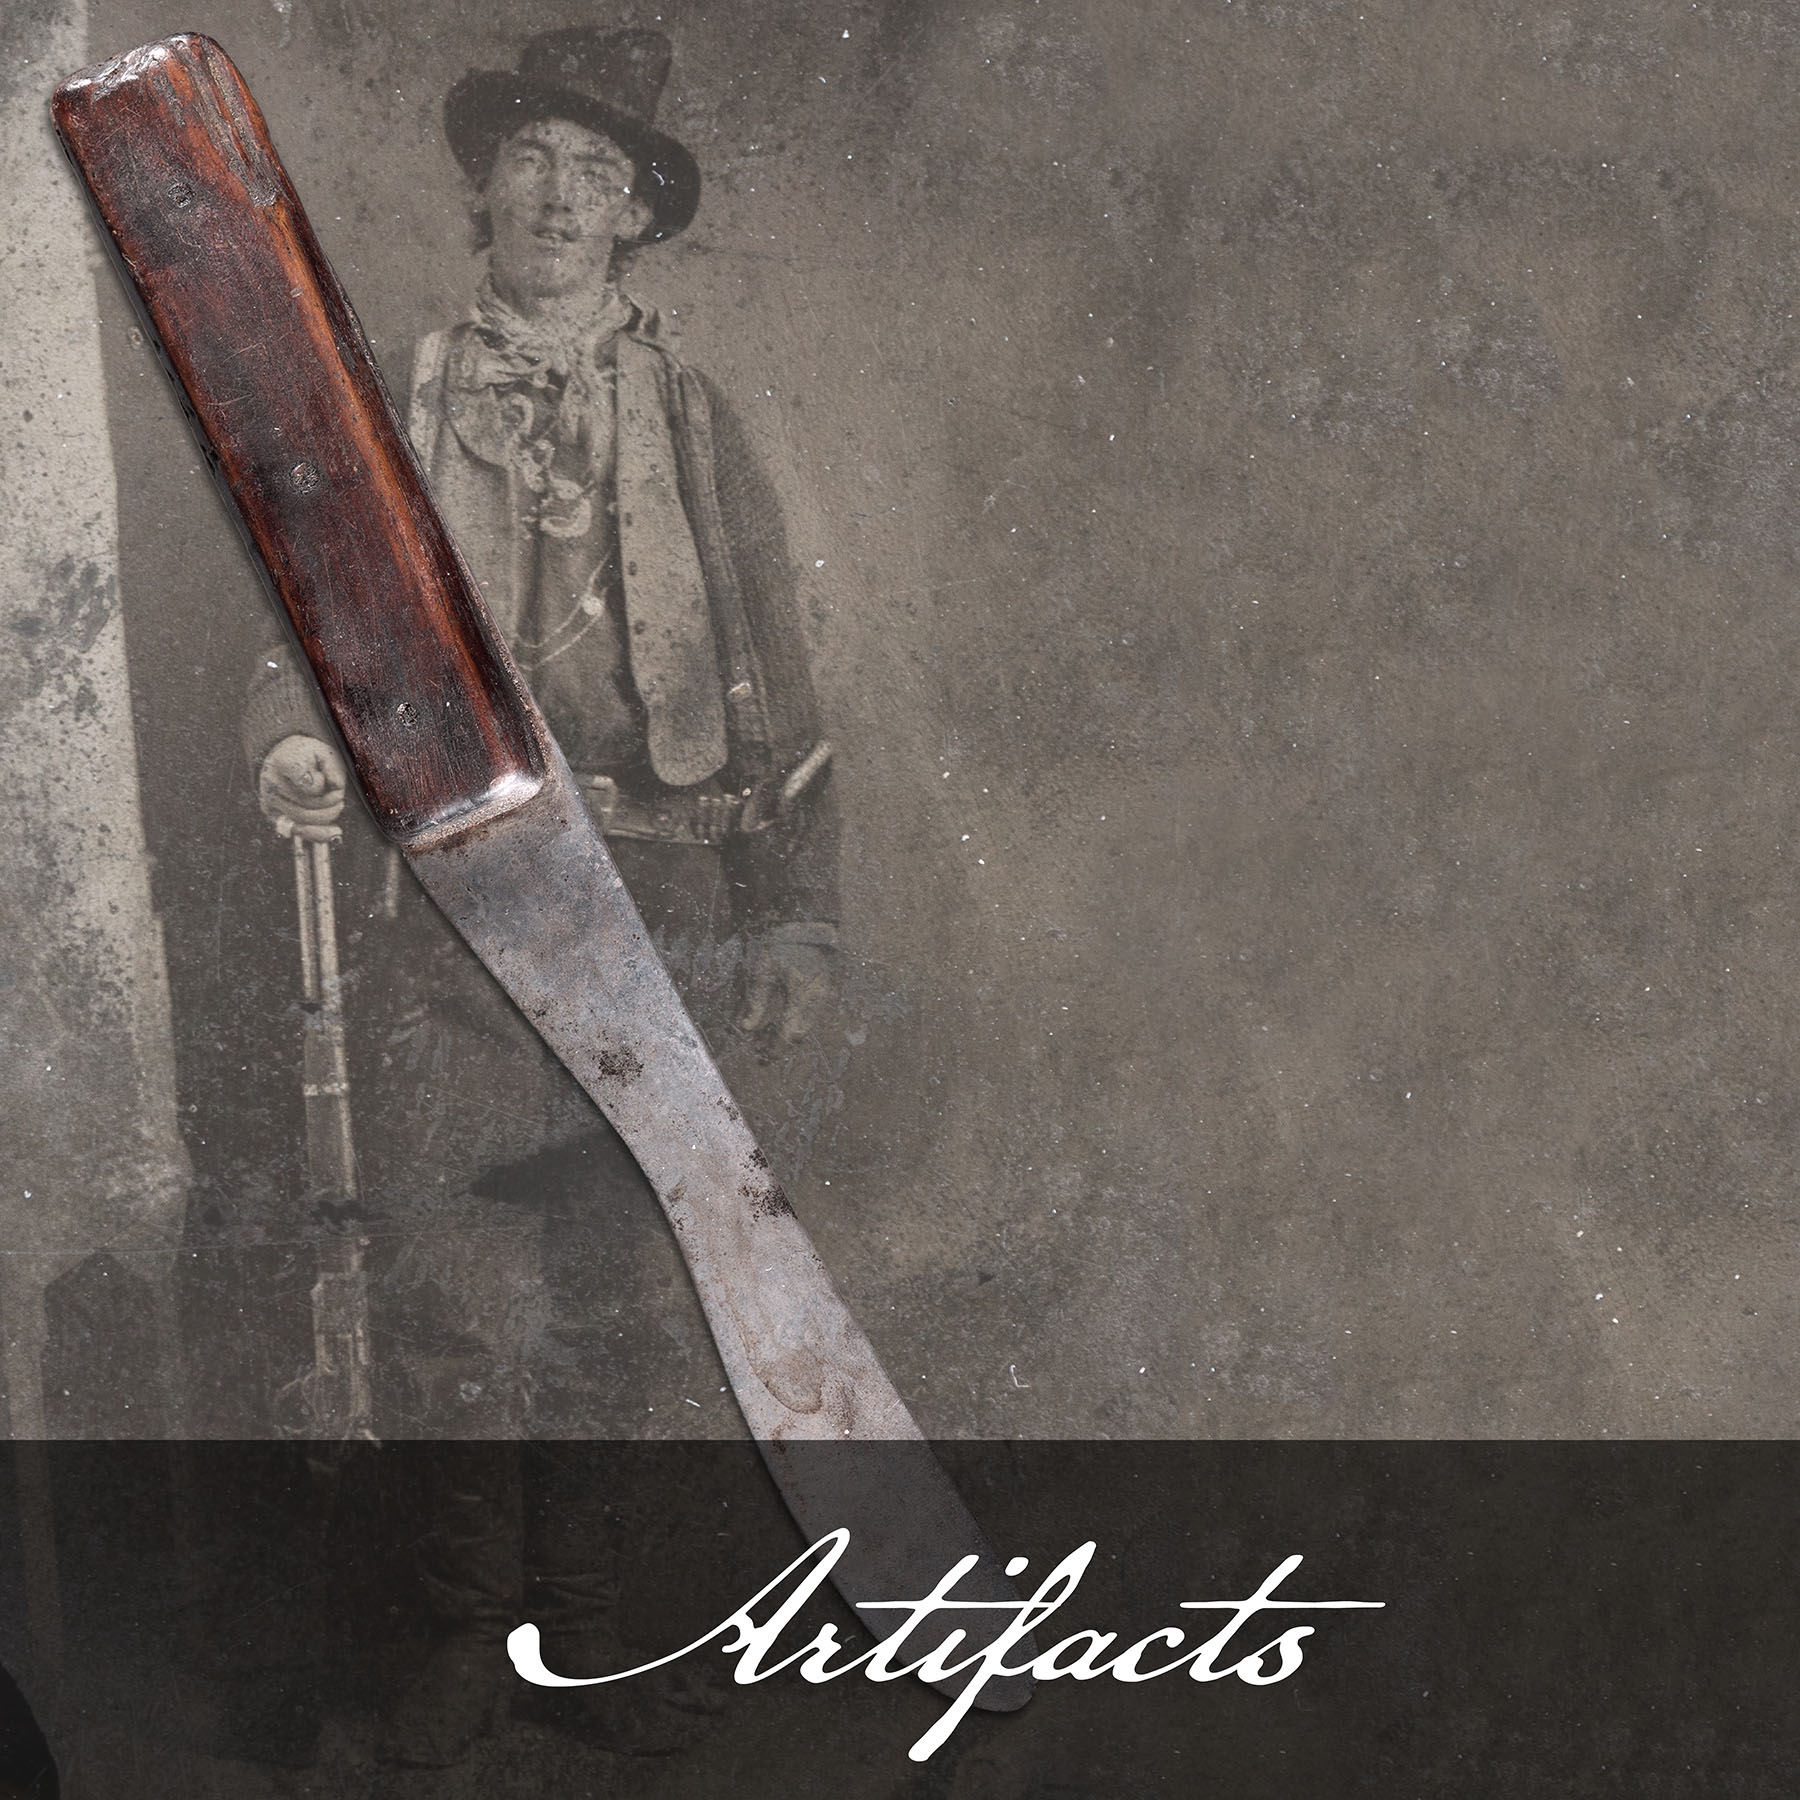 The Billy the Kid Knife — Old West Events